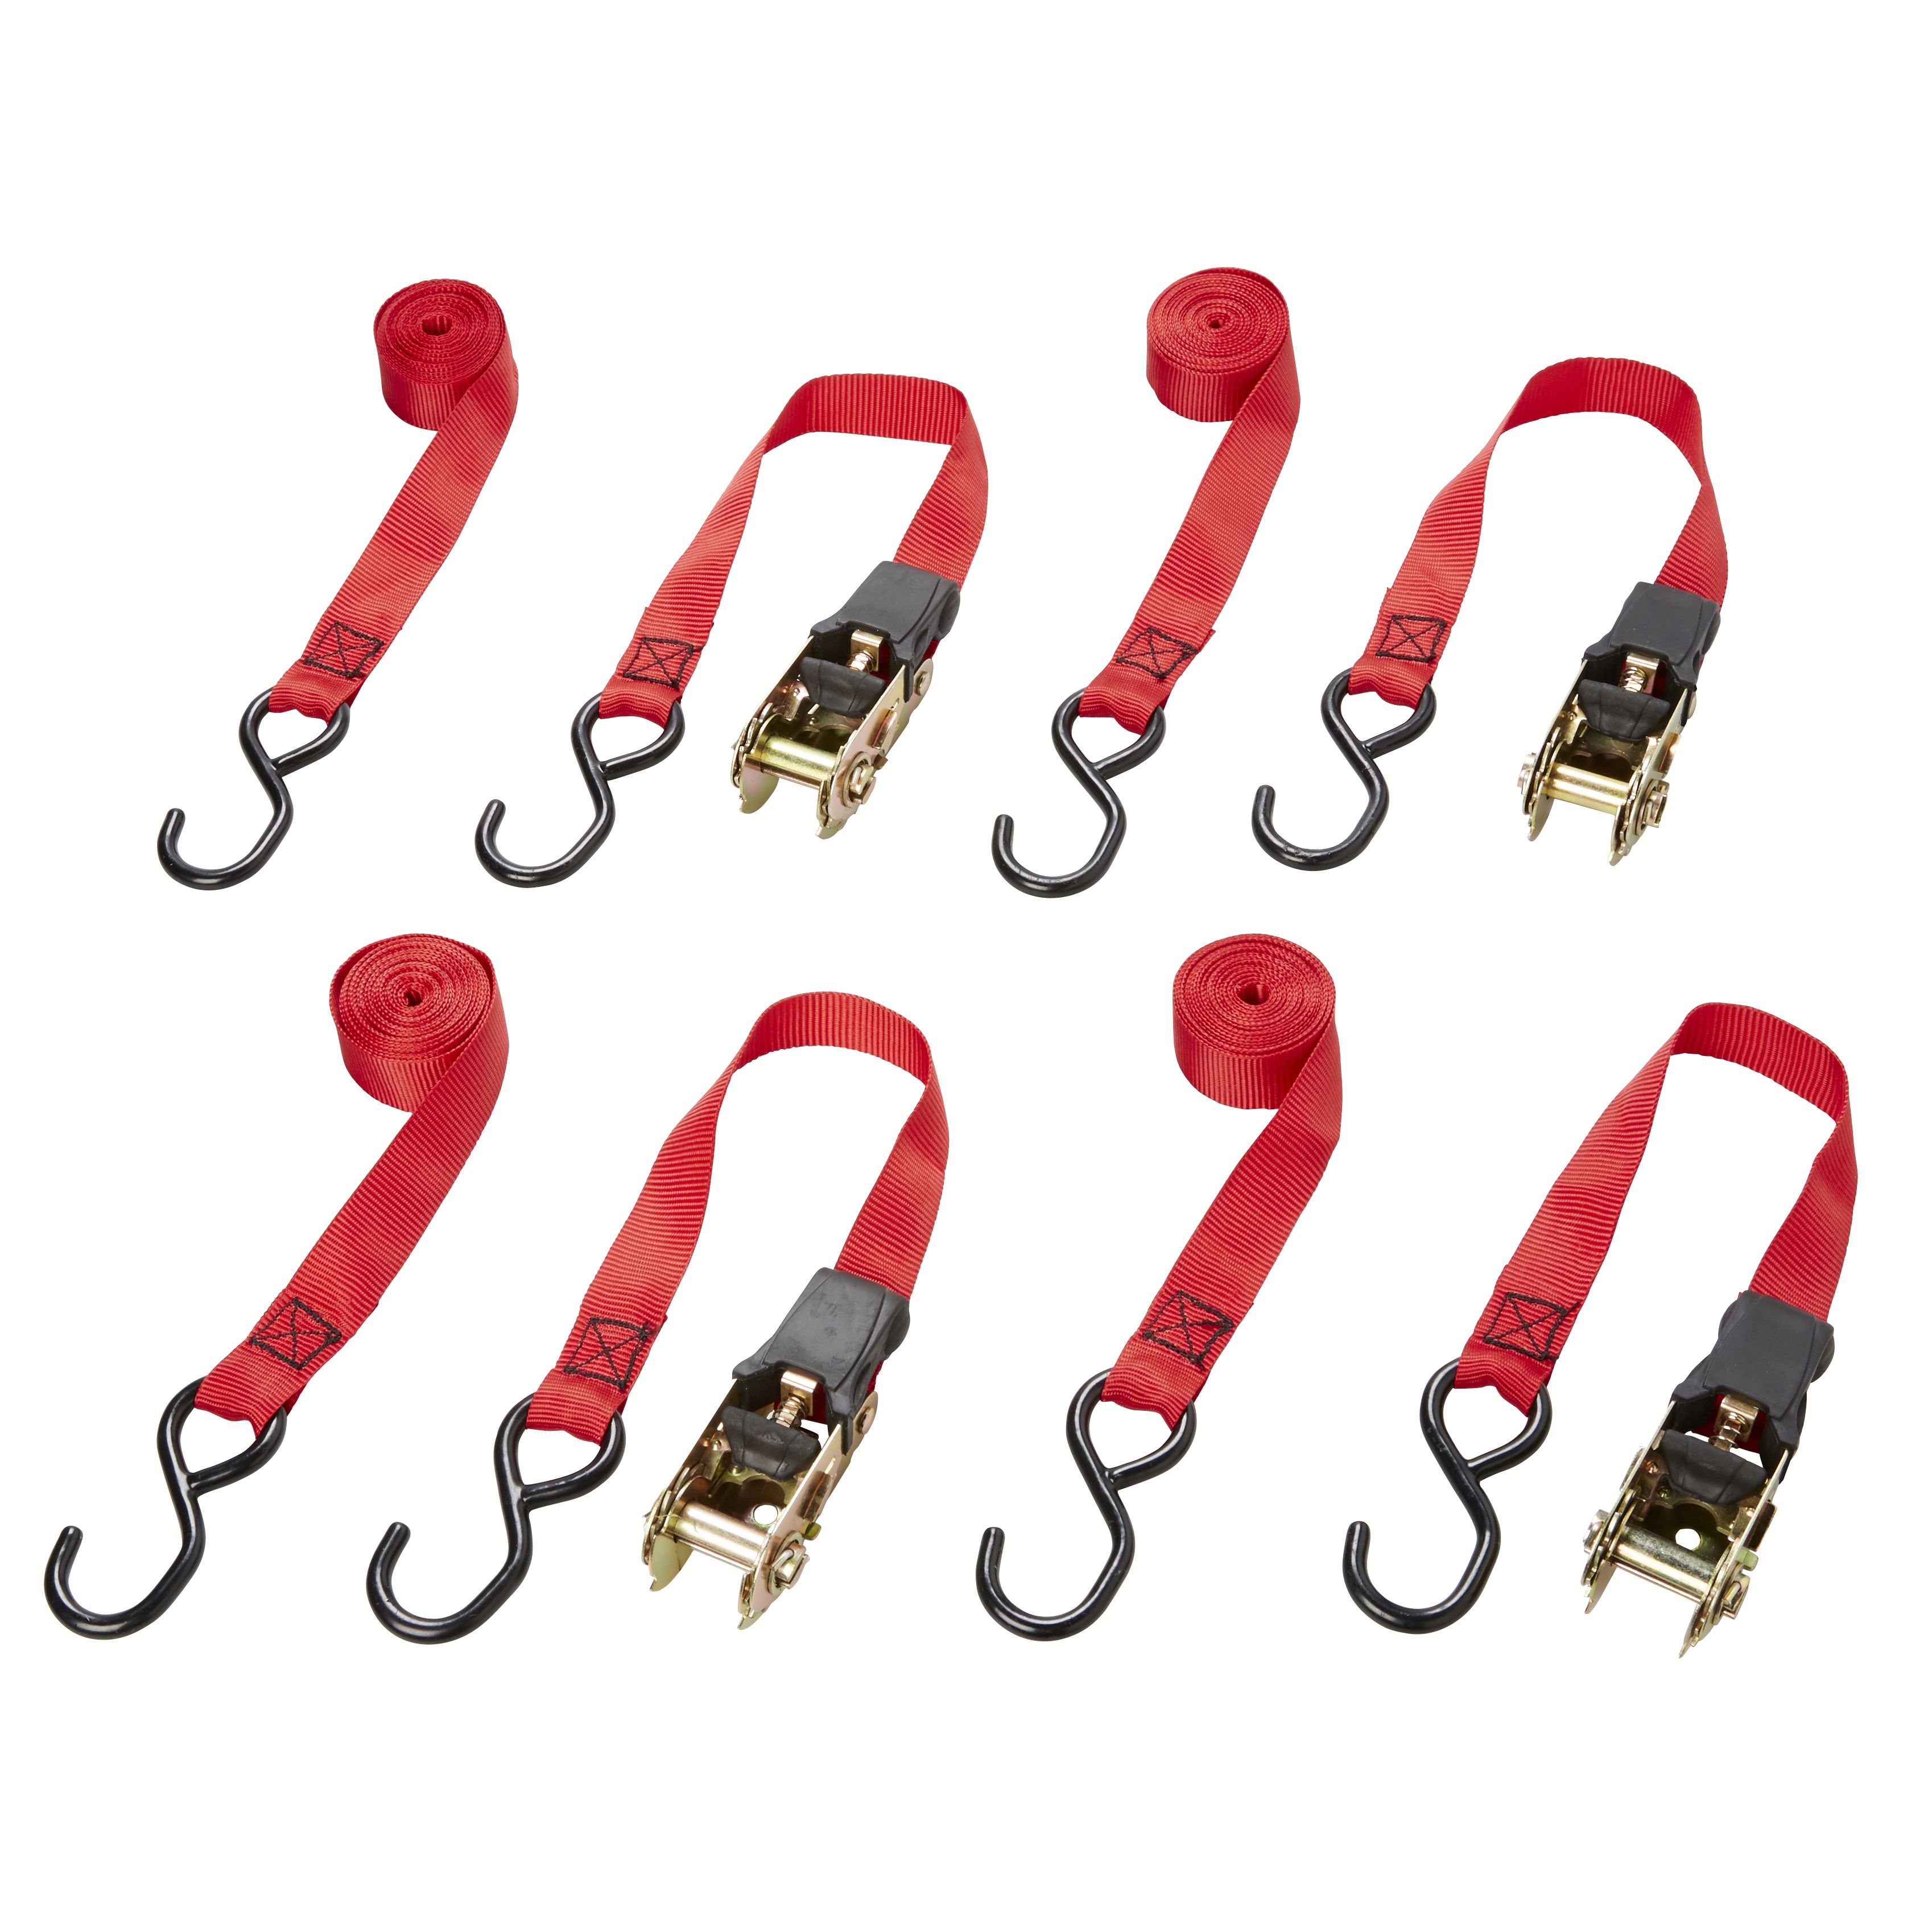 Diall Red 3M Ratchet & Hook, Pack of 4 | Departments | DIY at B&Q